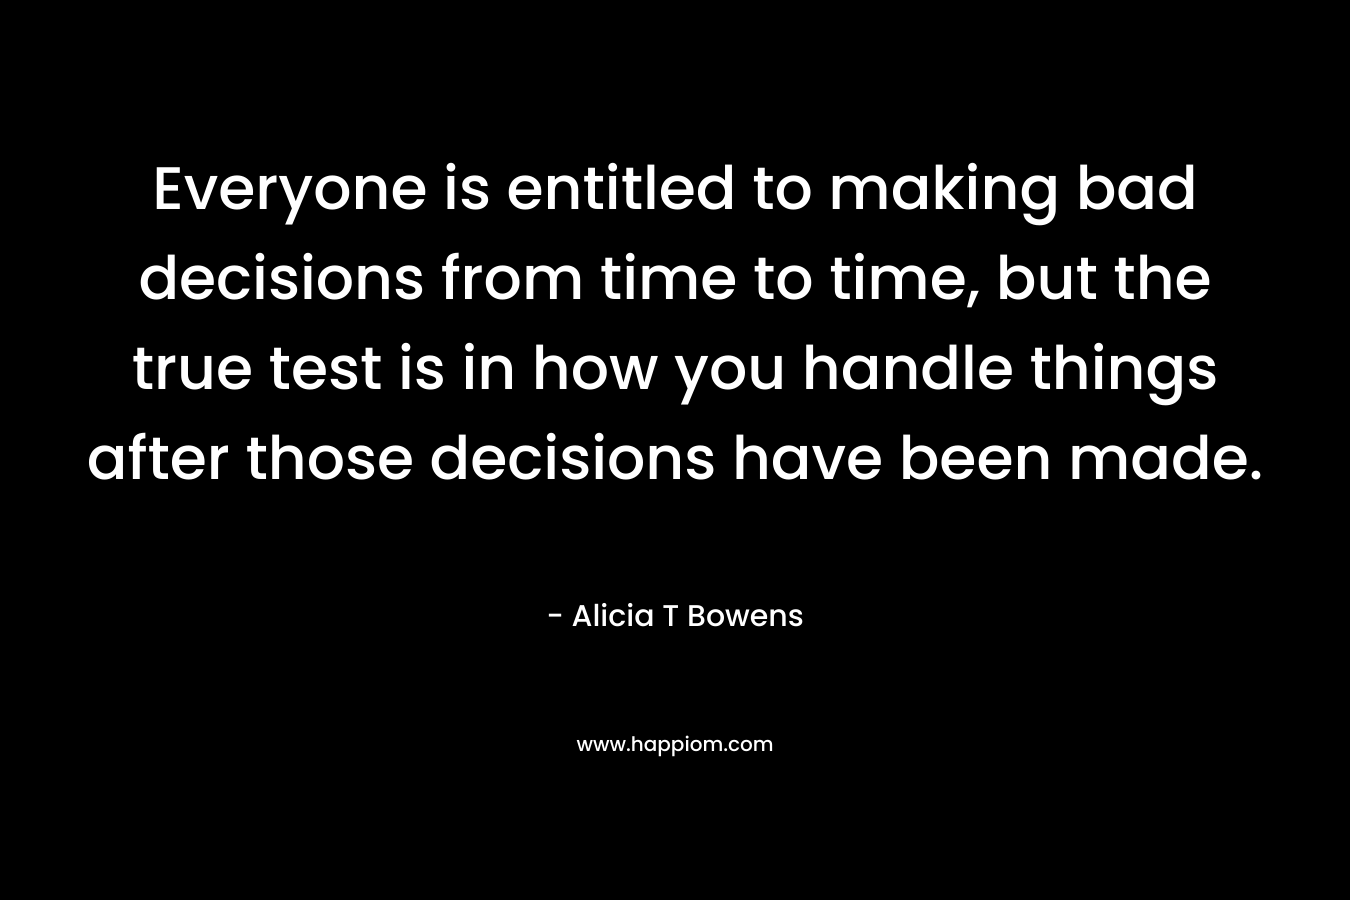 Everyone is entitled to making bad decisions from time to time, but the true test is in how you handle things after those decisions have been made. – Alicia T Bowens